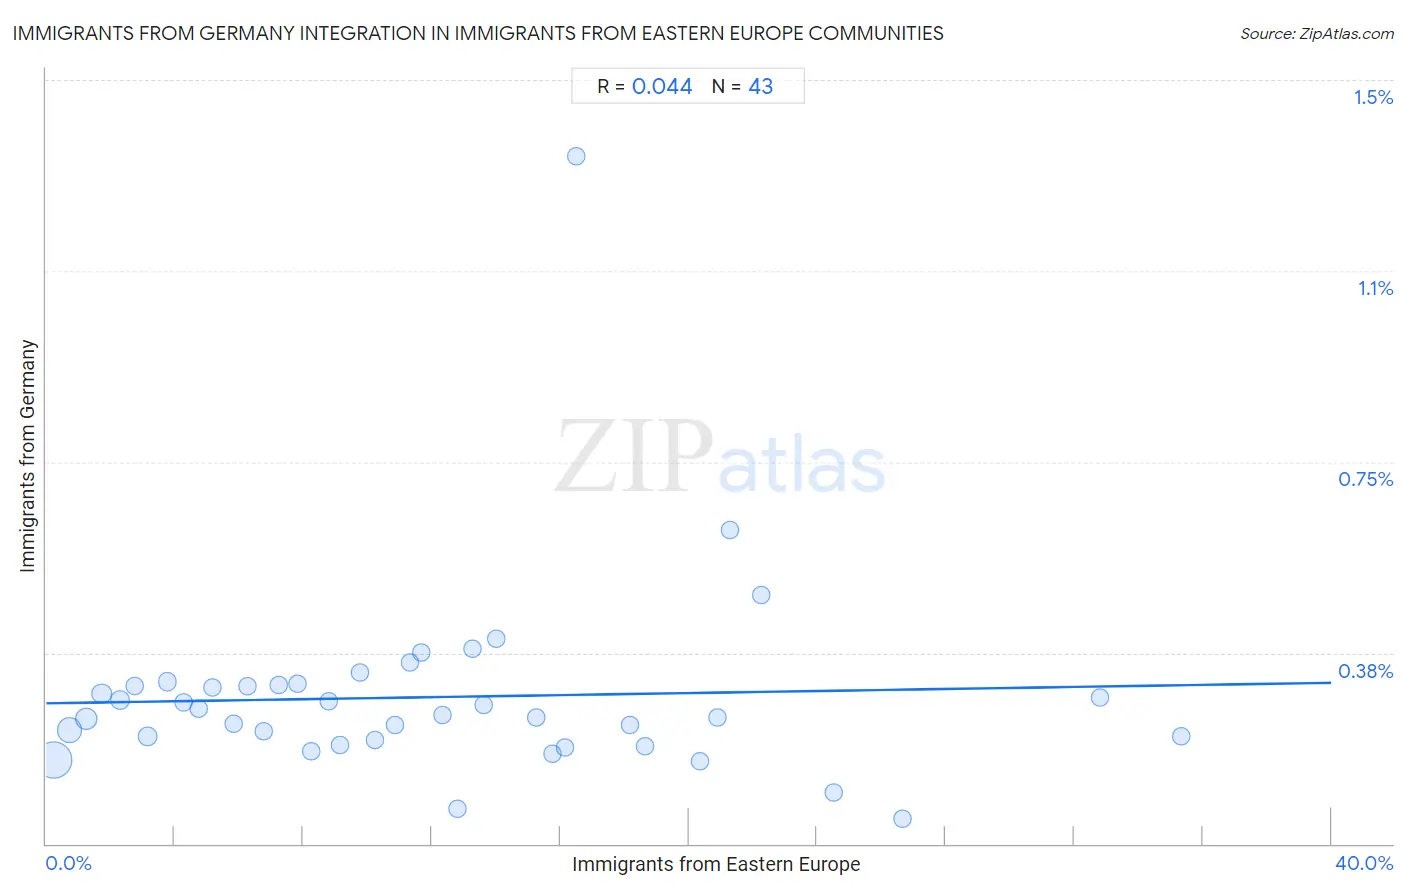 Immigrants from Eastern Europe Integration in Immigrants from Germany Communities